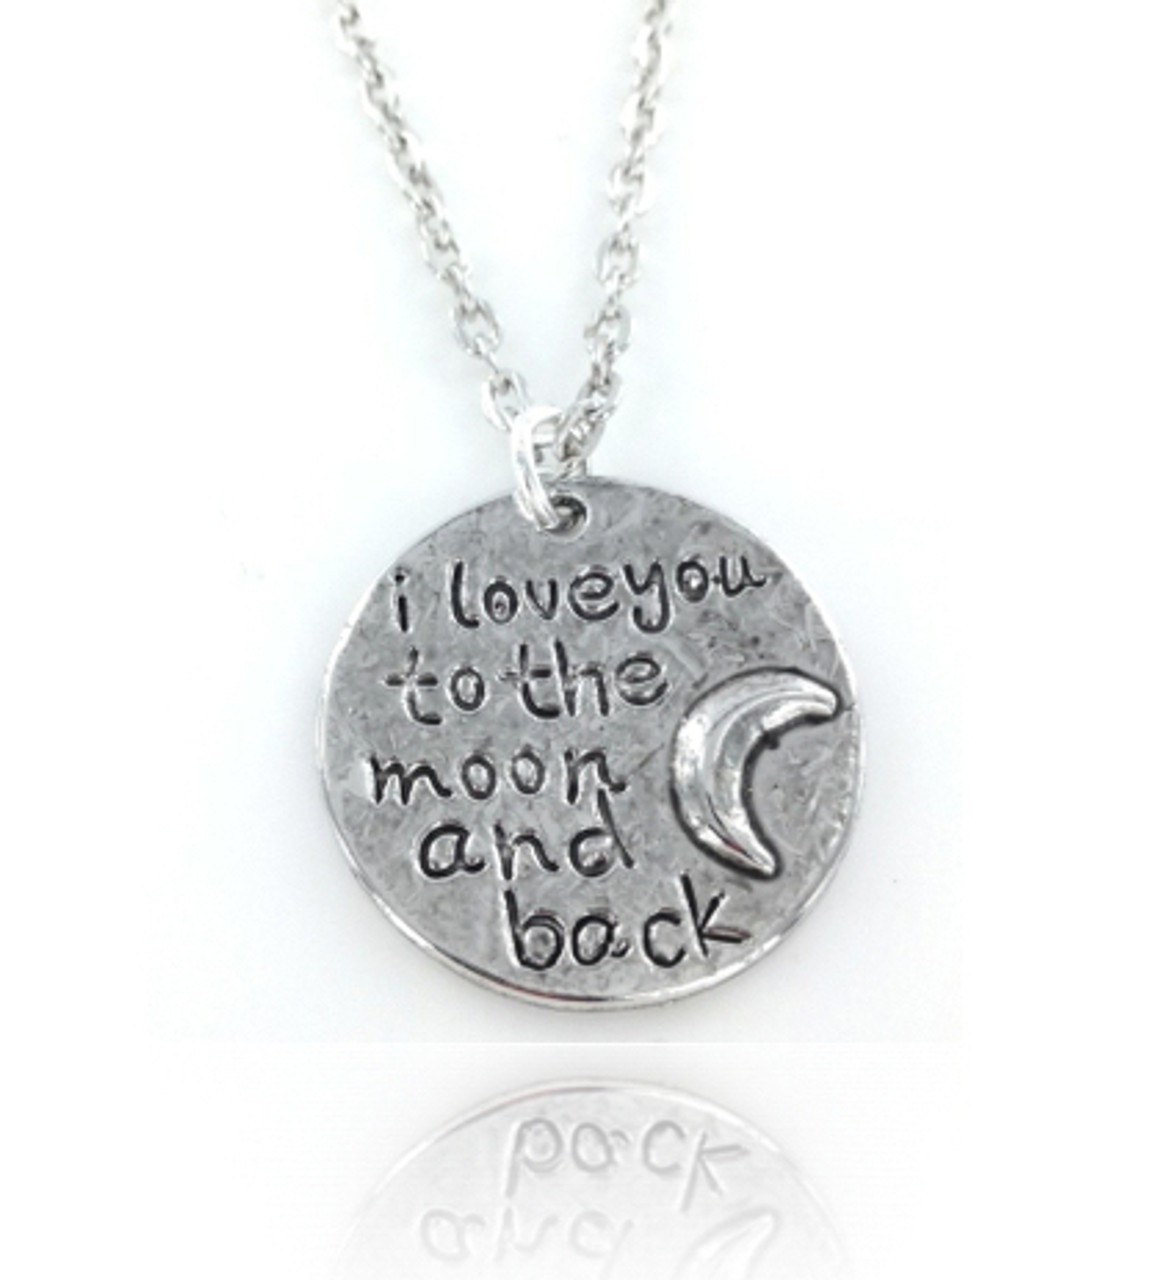 To the Moon and Back Necklace – Glacier Mist